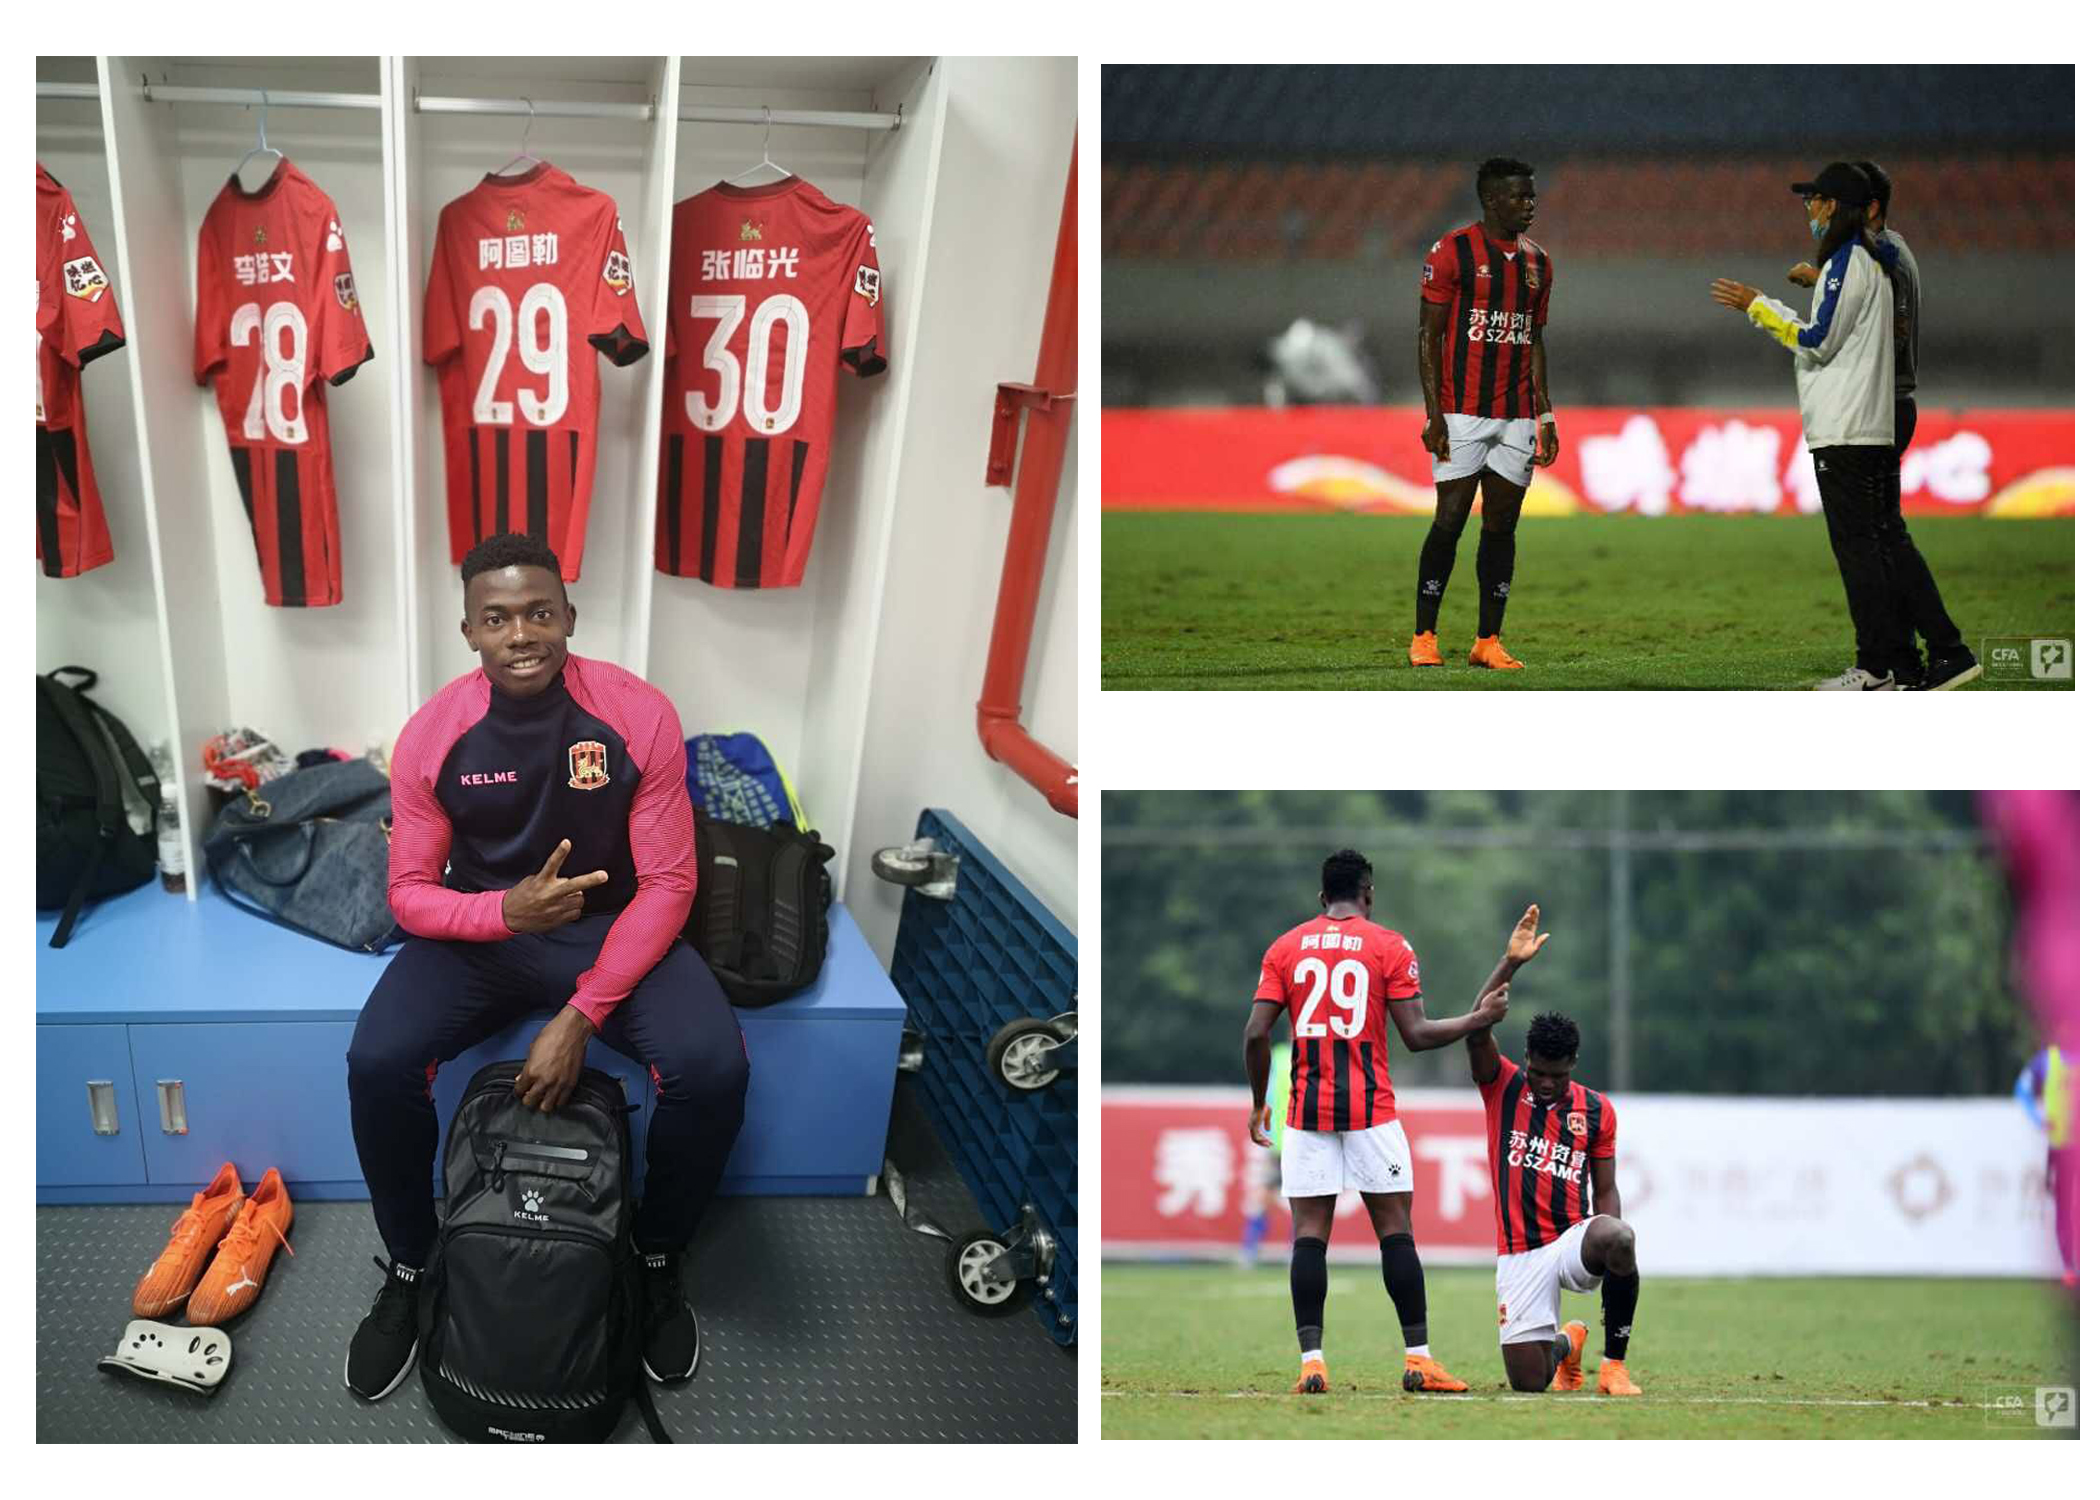 Joseph Atule Junior makes a late swerve from Shaanxi Chang’an Athletic FC to Suzhou Dongwu FC.